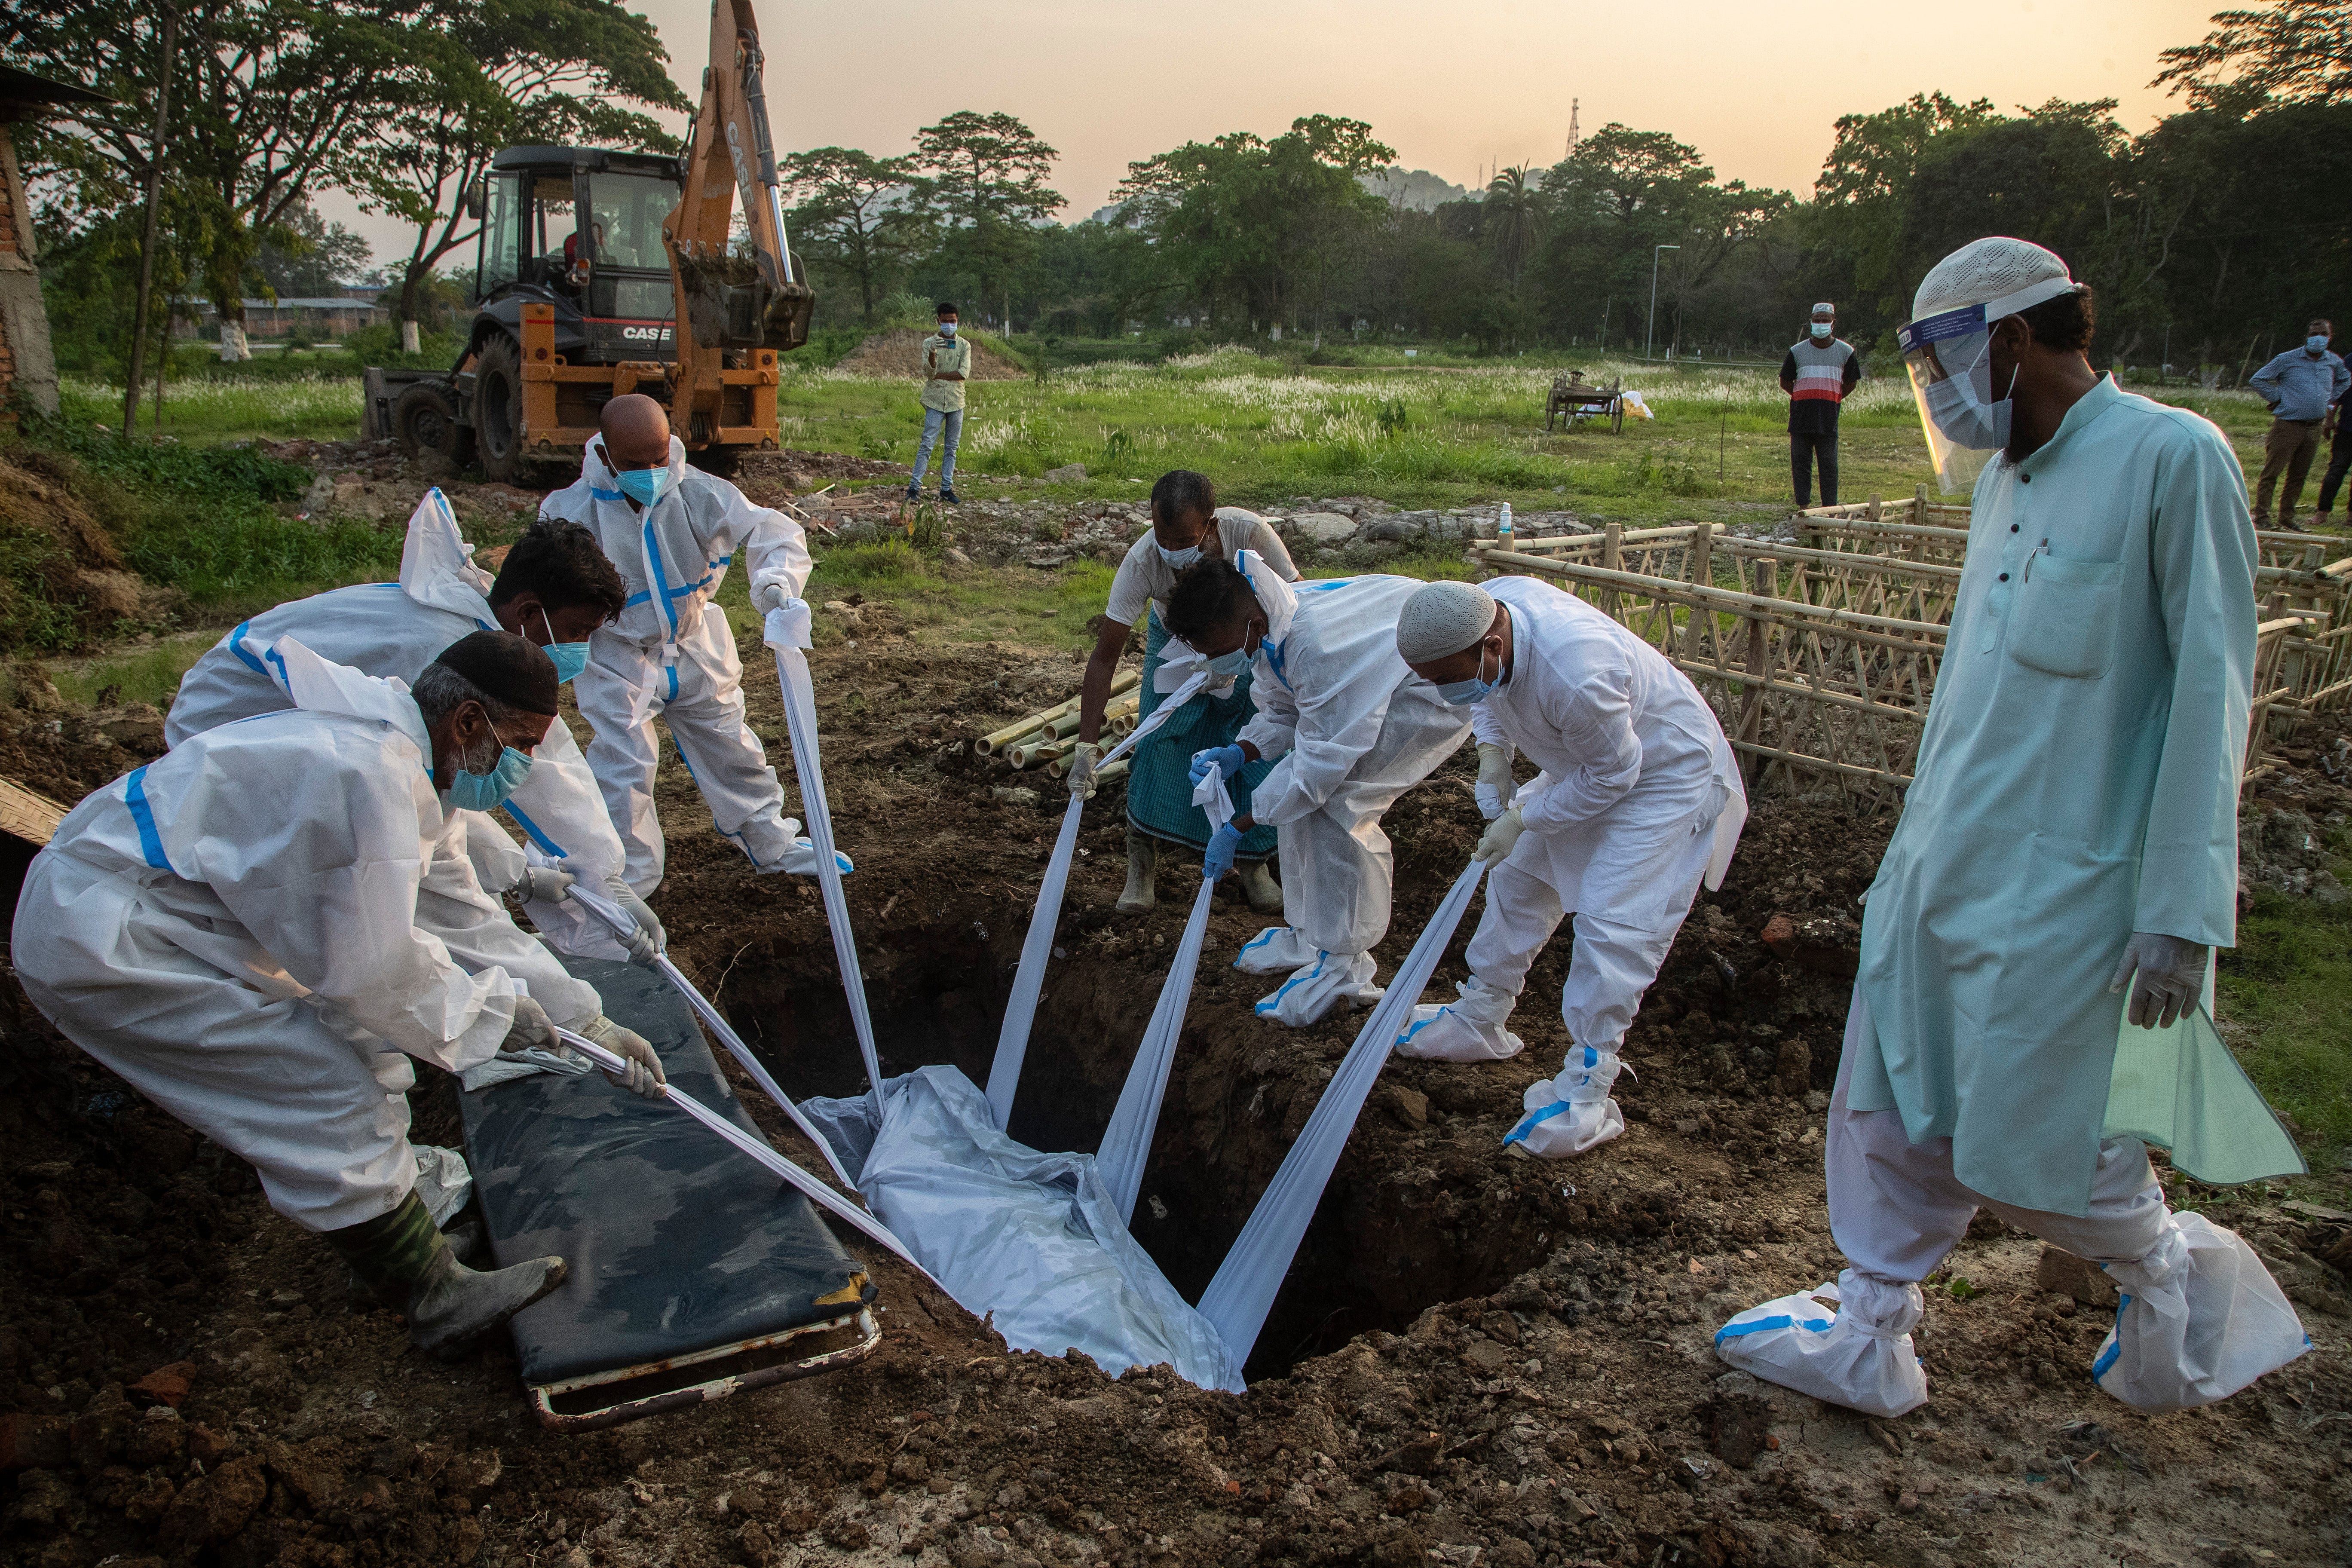 Relatives and municipal workers in protective gear bury the body of a person who died due to COVID-19 in Gauhati, India, Sunday, April 25, 2021.